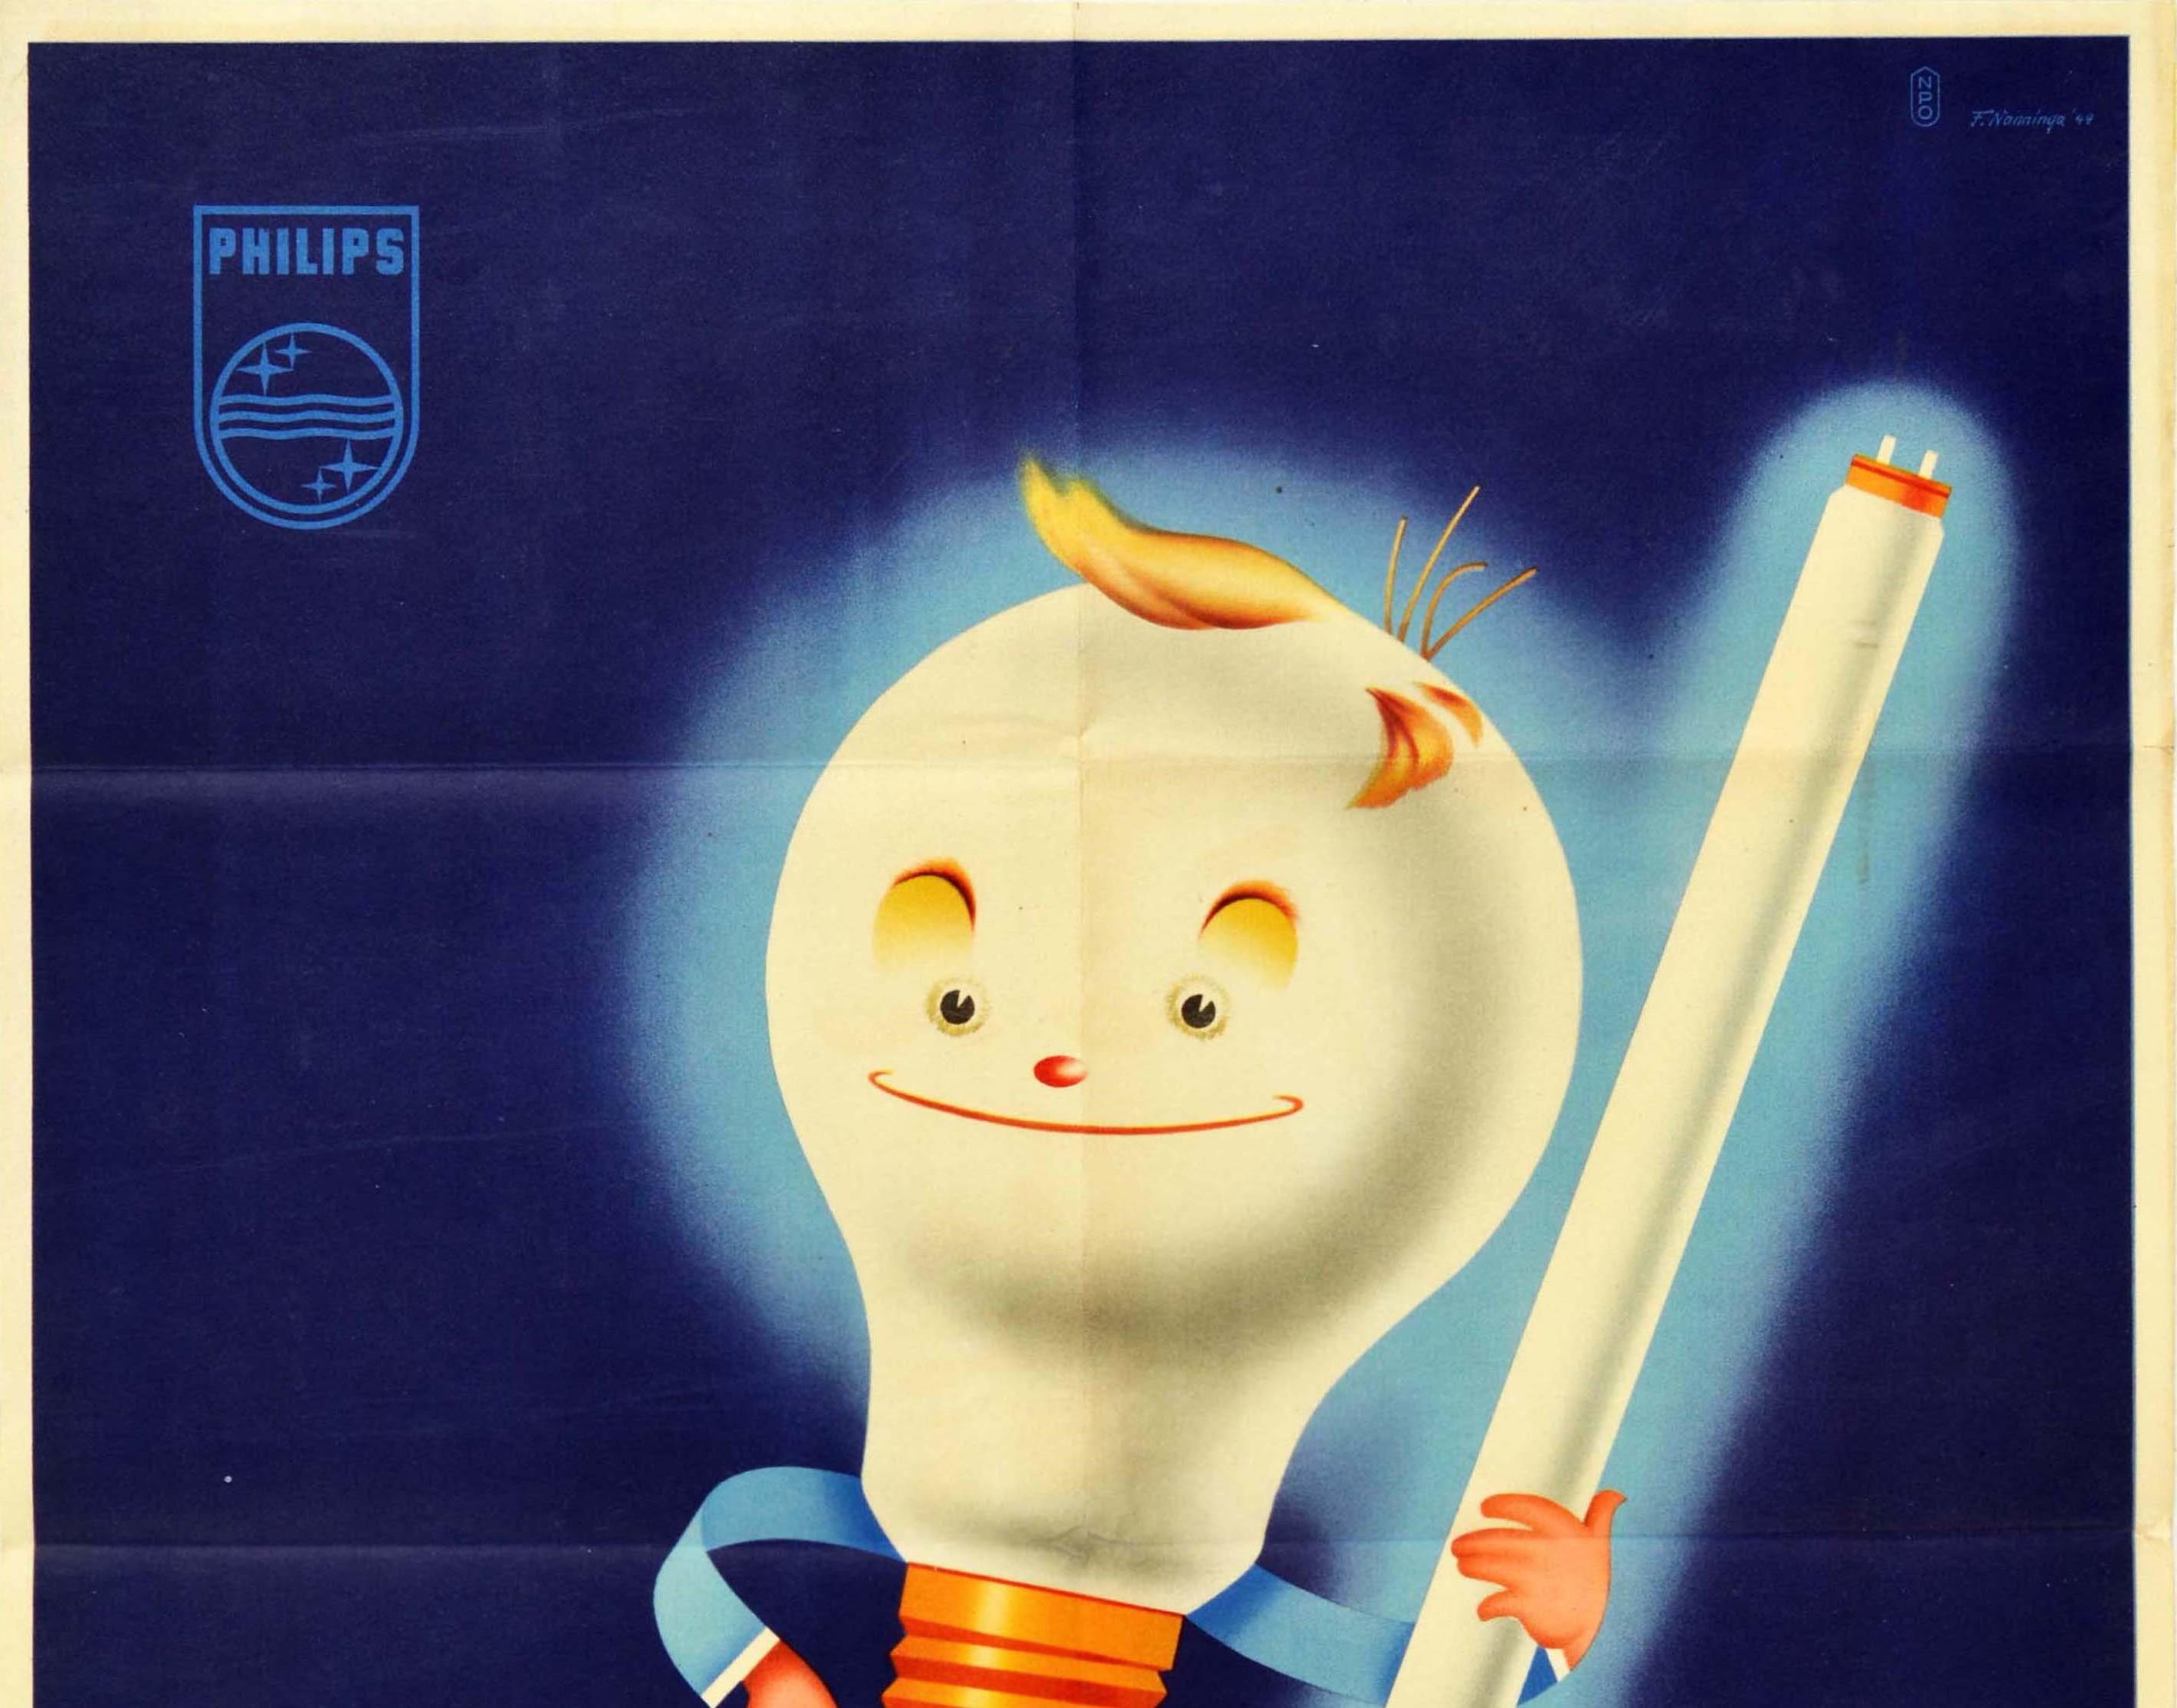 Original vintage advertising poster for Philips light bulbs featuring a fun design by Frank Nanninga (1920-1999) depicting a cartoon lightbulb with arms and legs, a smiling face and blonde hair, holding a fluorescent tube lightbulb glowing on the